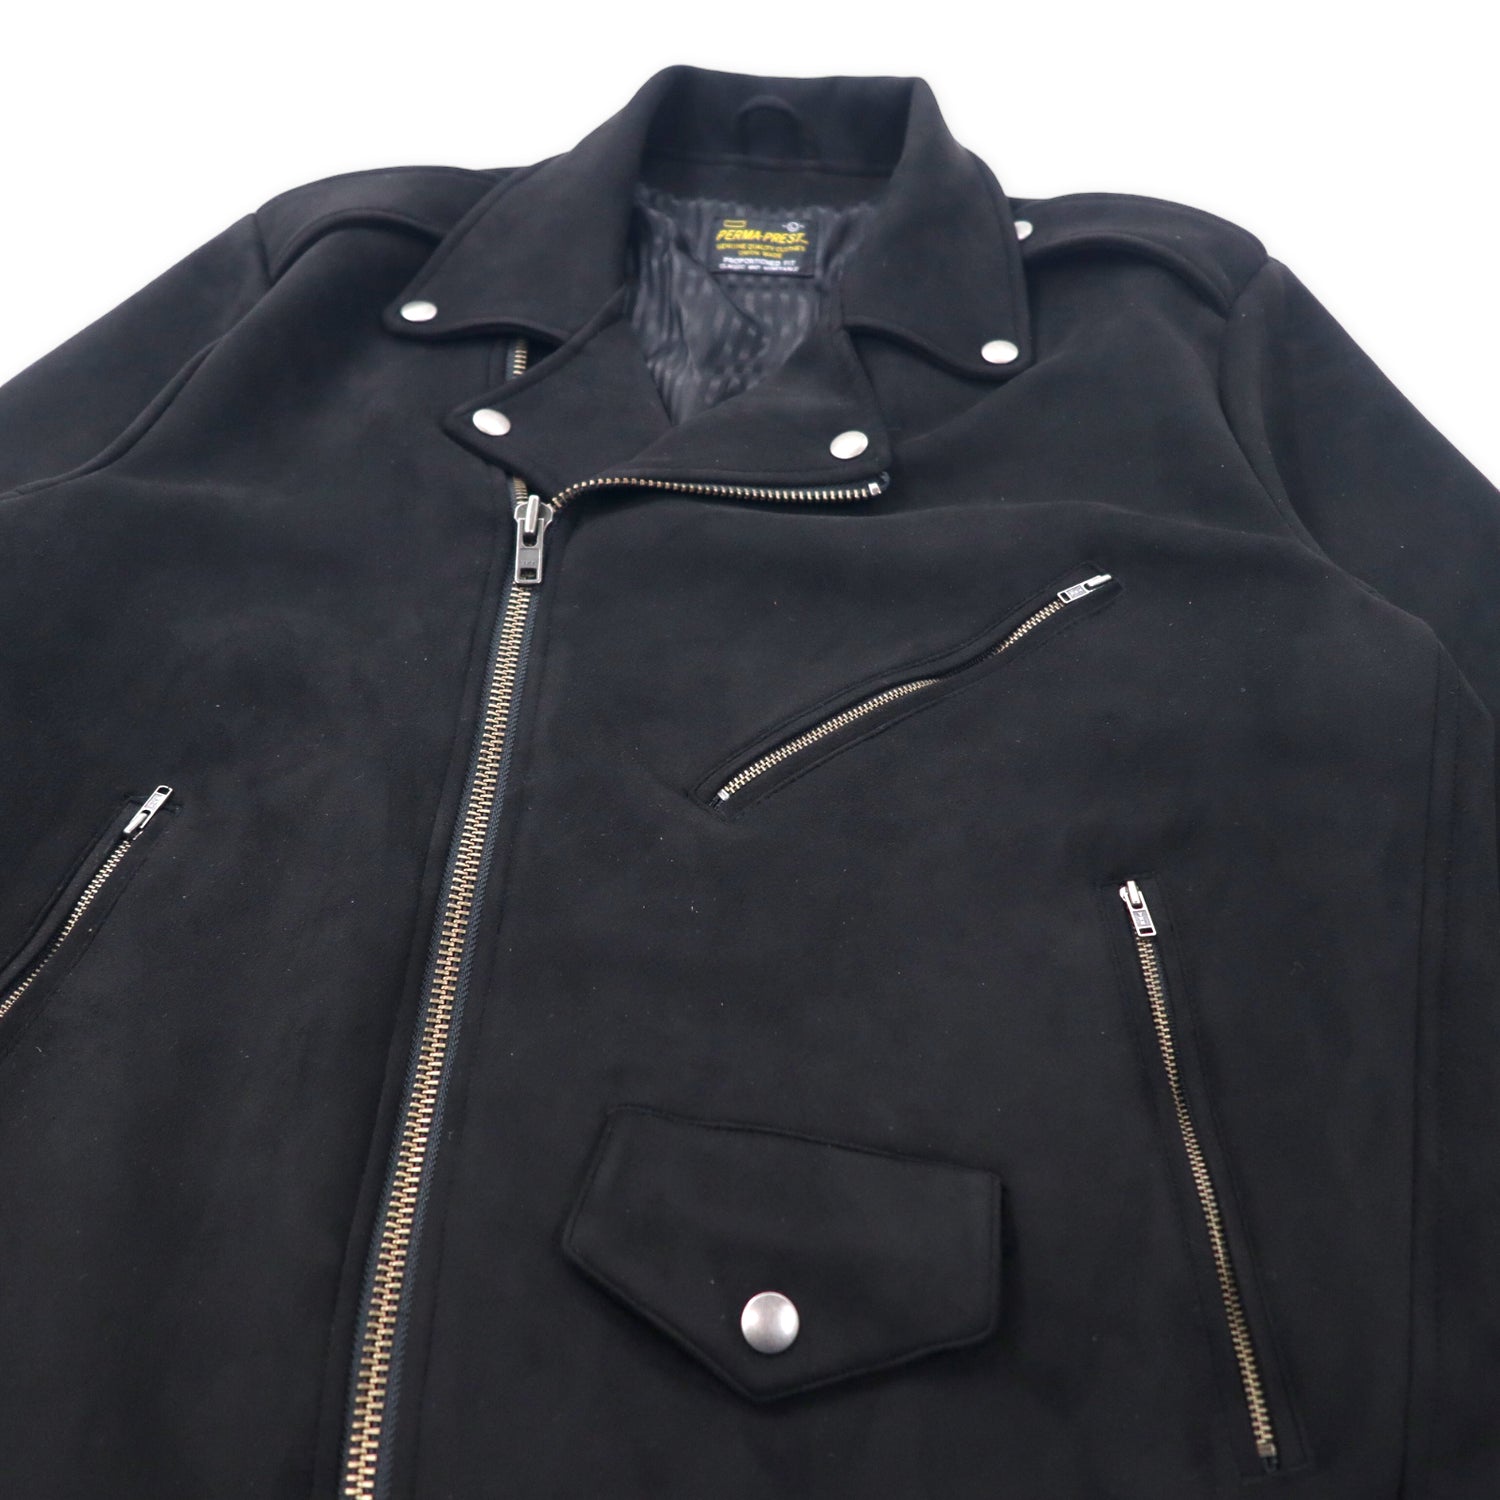 PERMA-PREST Fake Suede Double Riders Jacket L Black Polyester